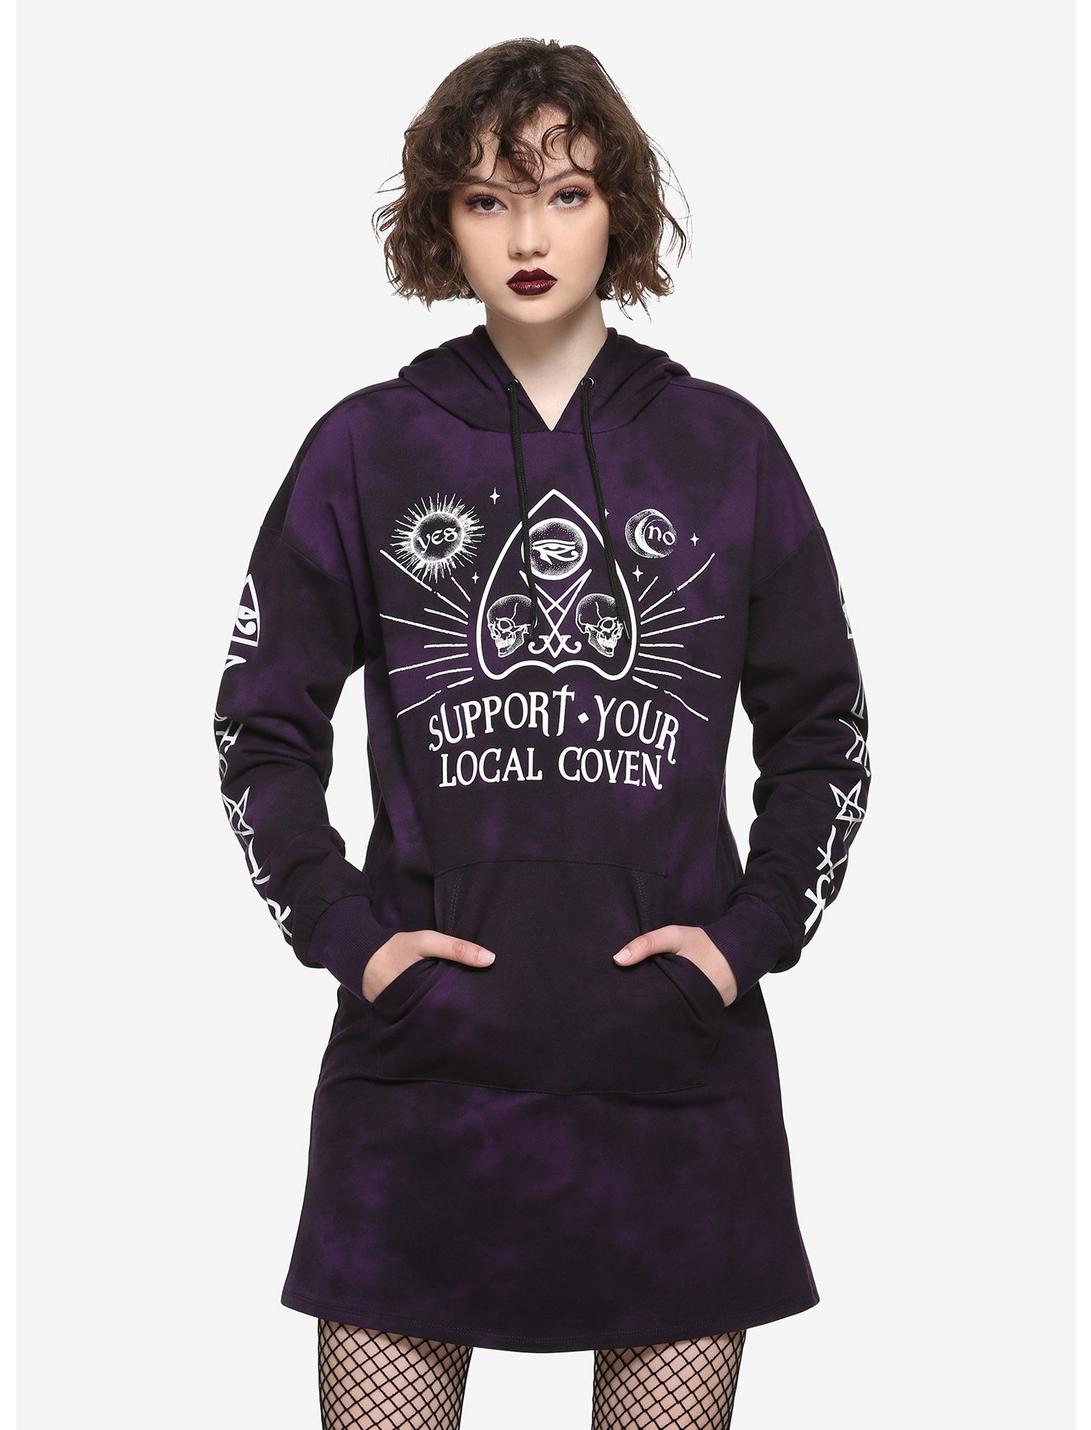 Support Your Local Coven Purple Tie-Dye Hoodie Dress, TIE DYE, hi-res